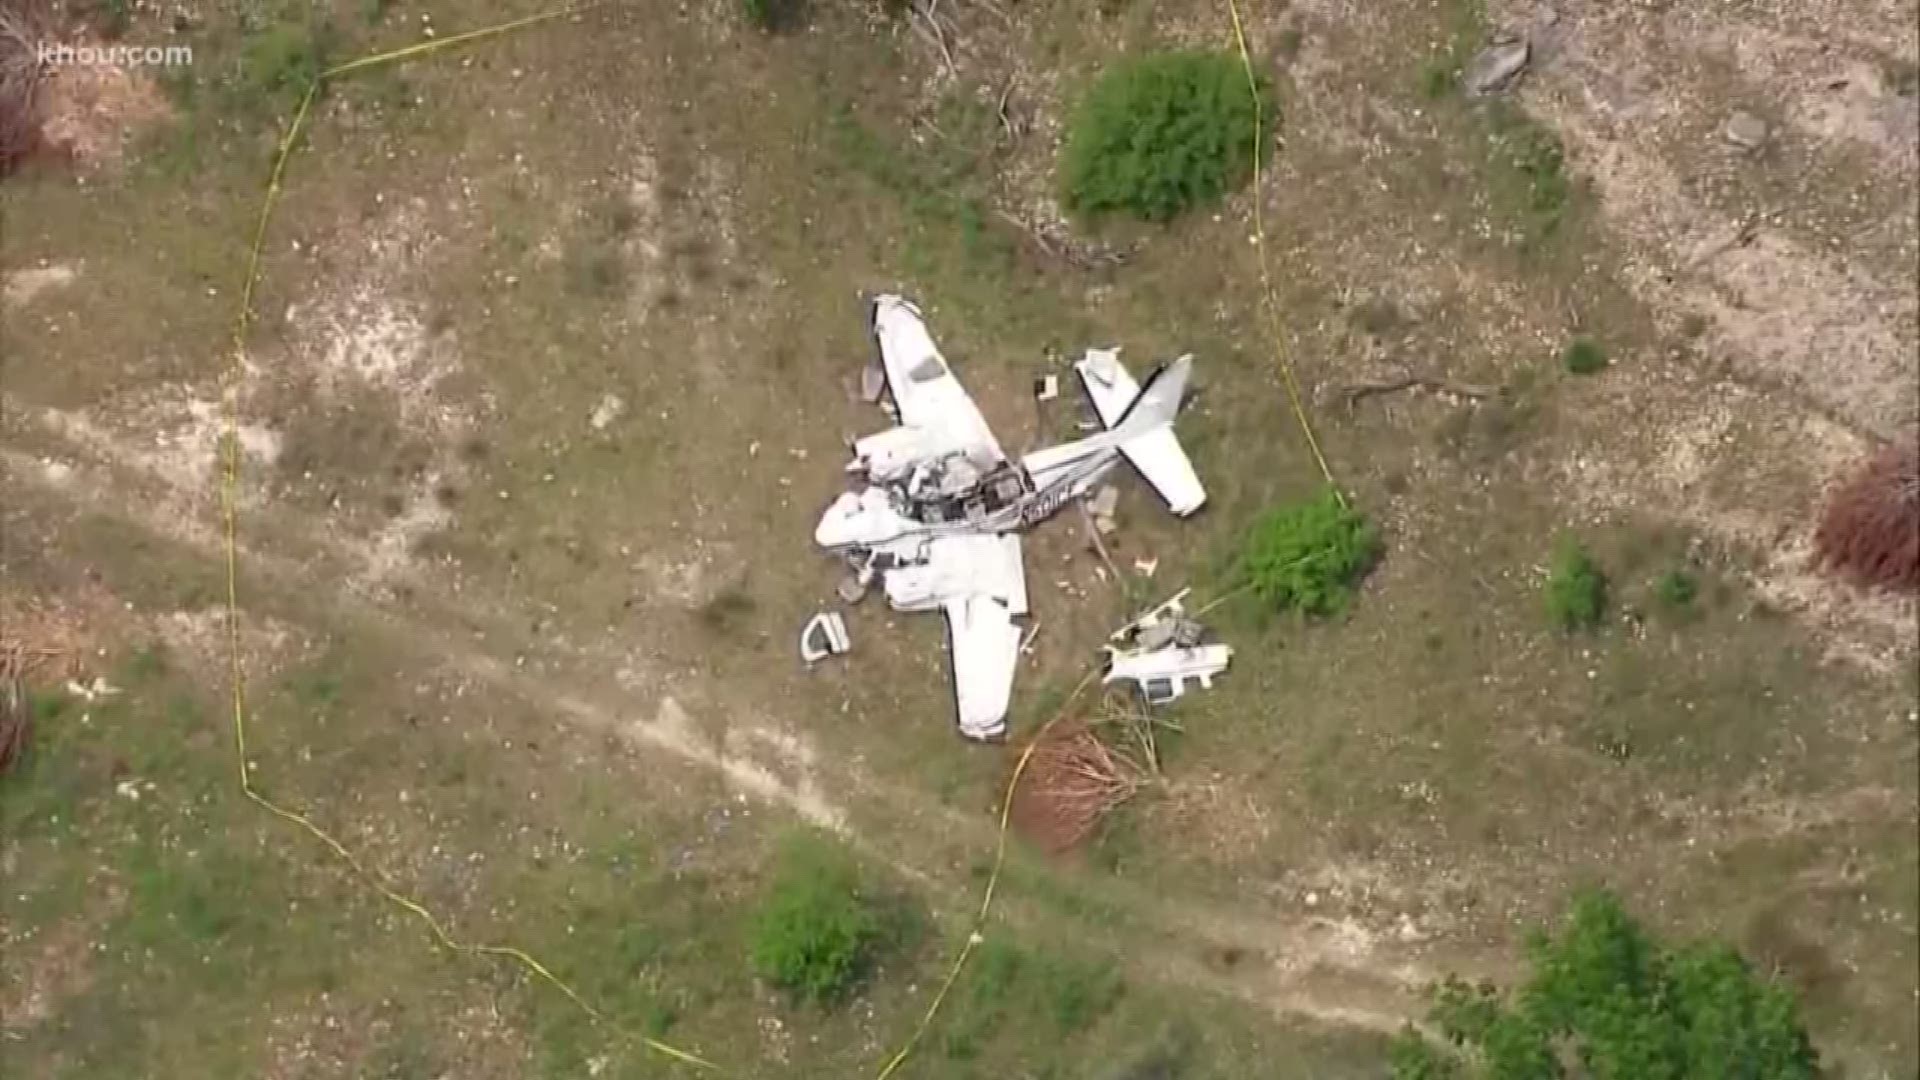 DPS released the identities of the six people killed in a plane crash in Kerrville. All six are from Houston. Experts weigh in on what they believe caused the crash.